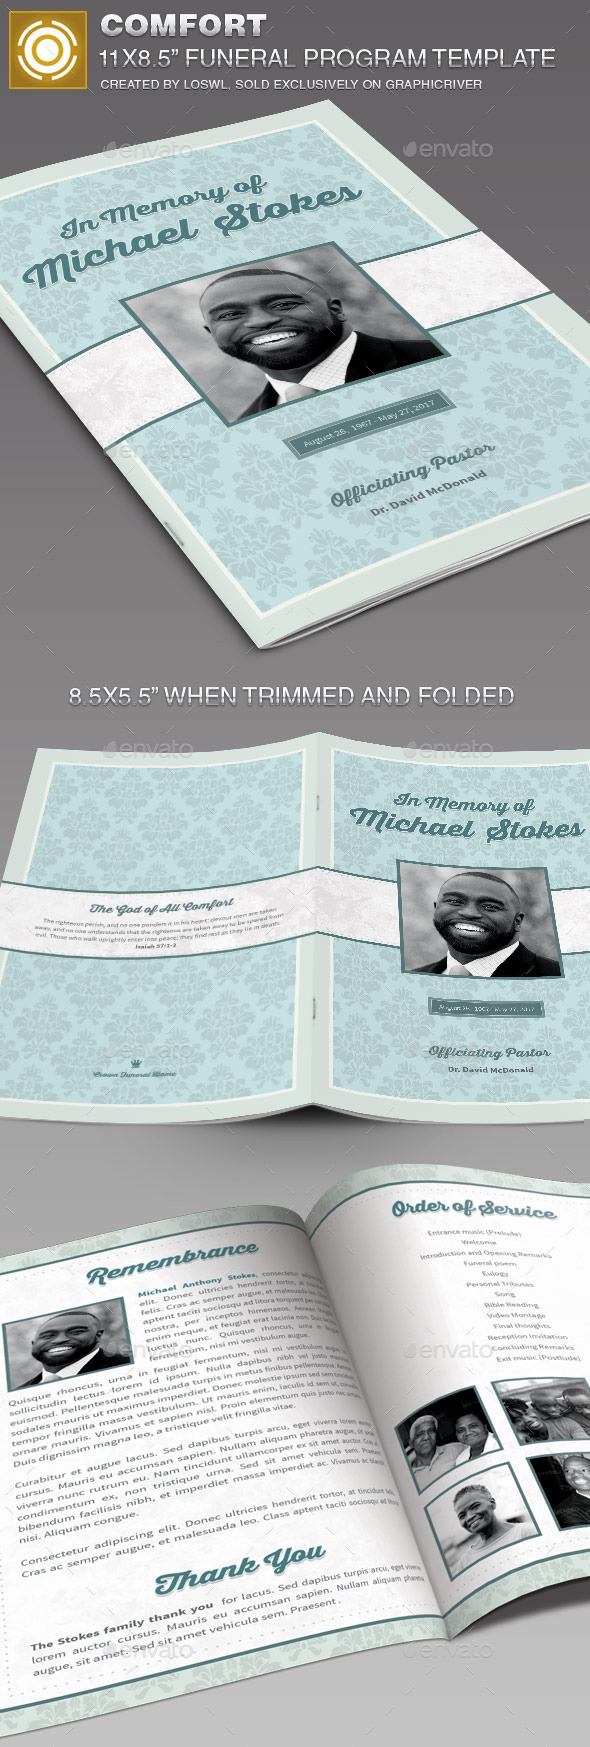 Comfort 20funeral 20program template image preview